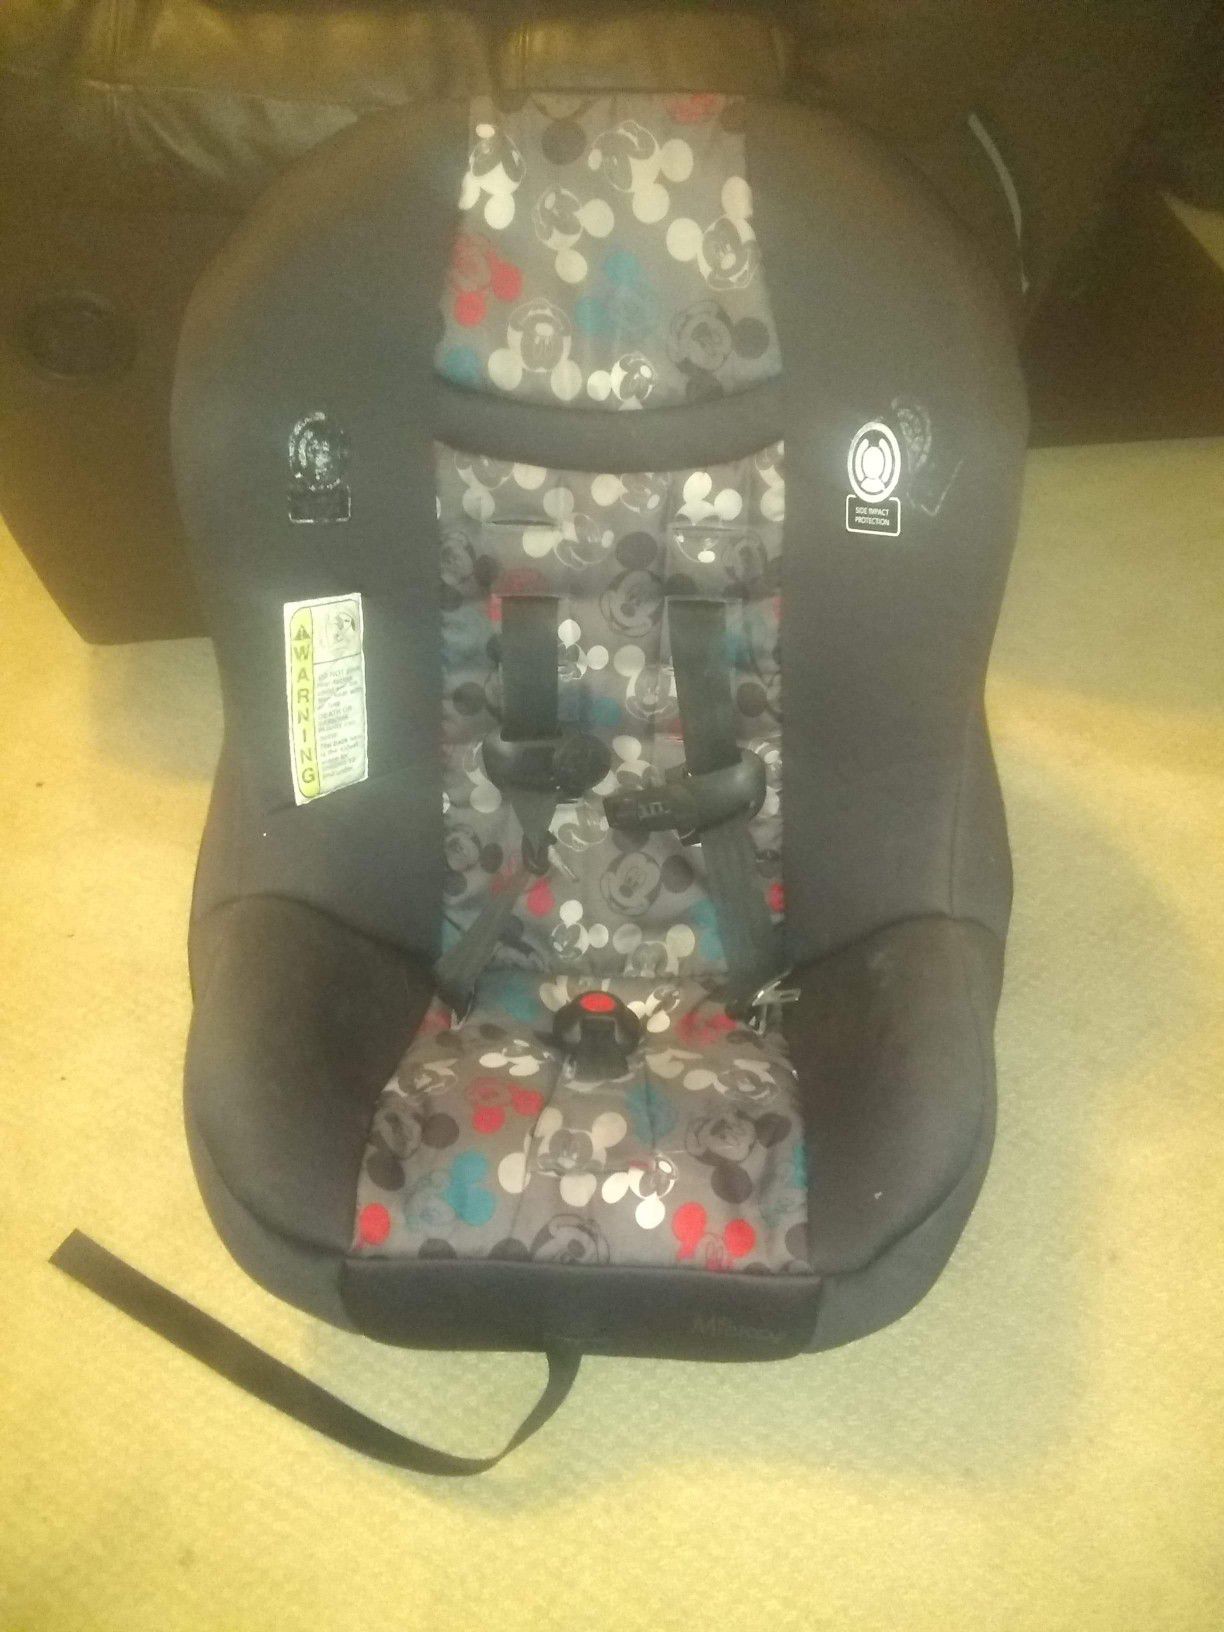 Mickey mouse car seat